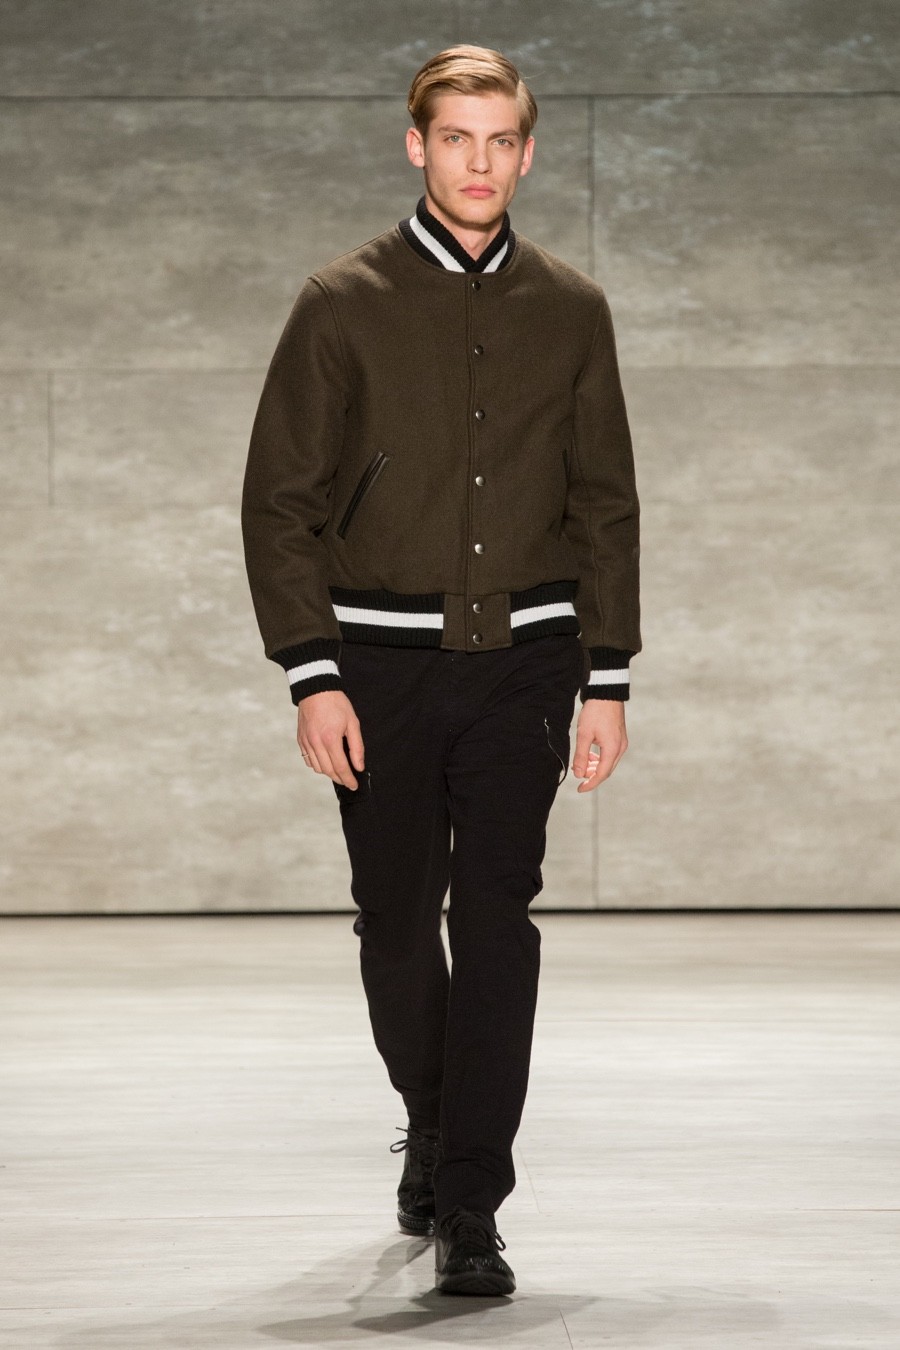 Todd Snyder Fall Winter 2015 Menswear Collection 008